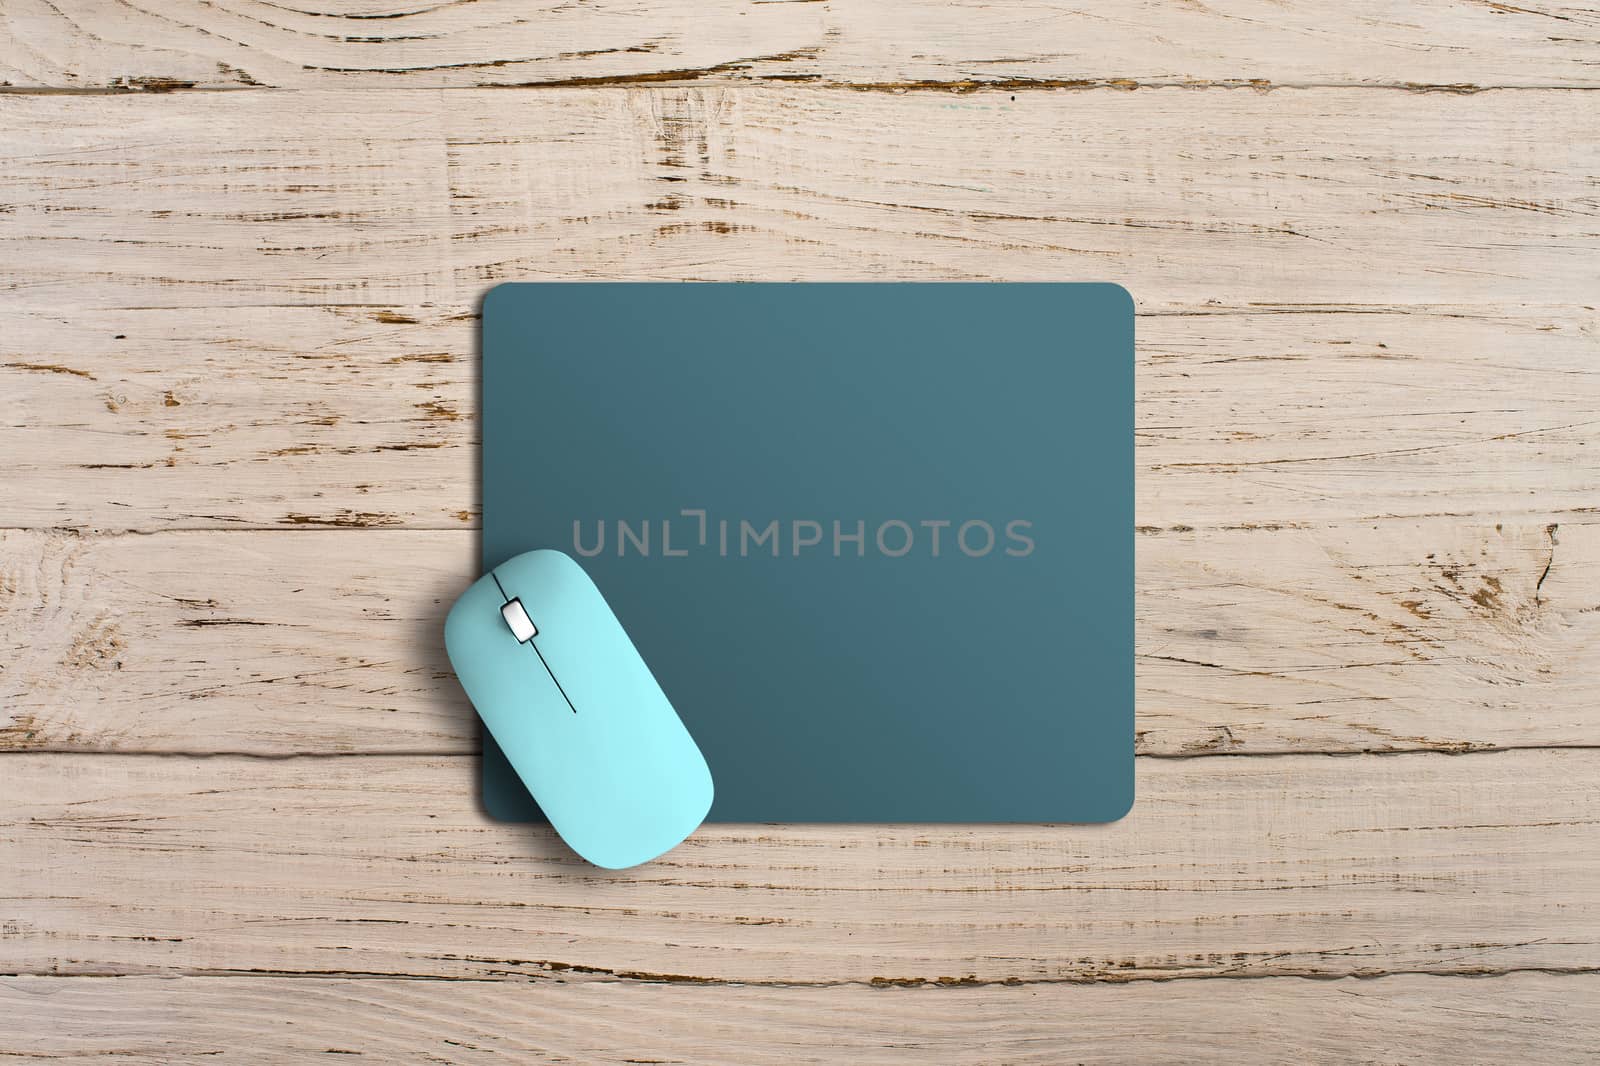 Modern wireless mouse and pad on background